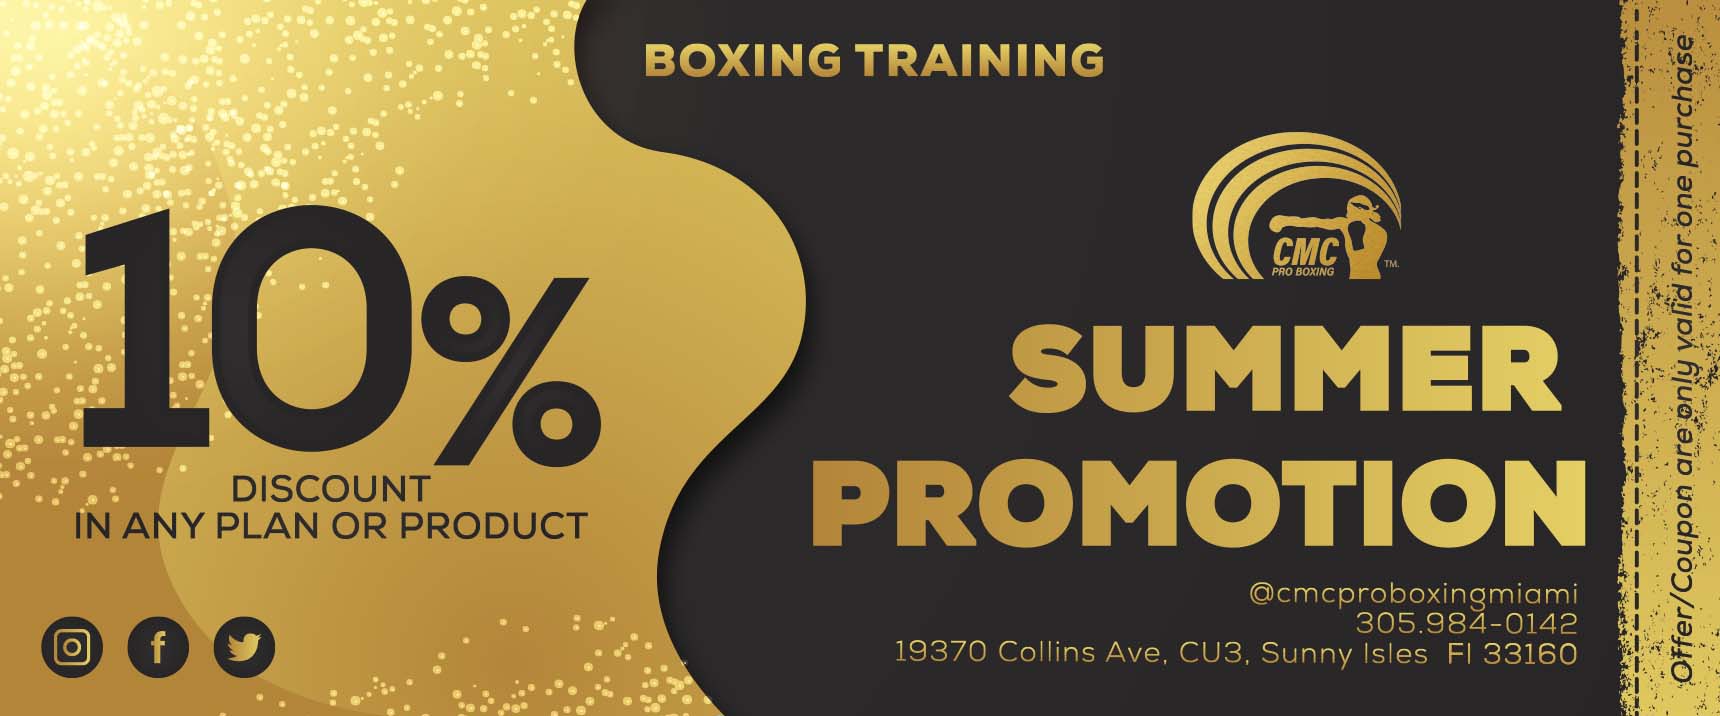 CMC PRO BOXING-SUMMER PROMOTIONS